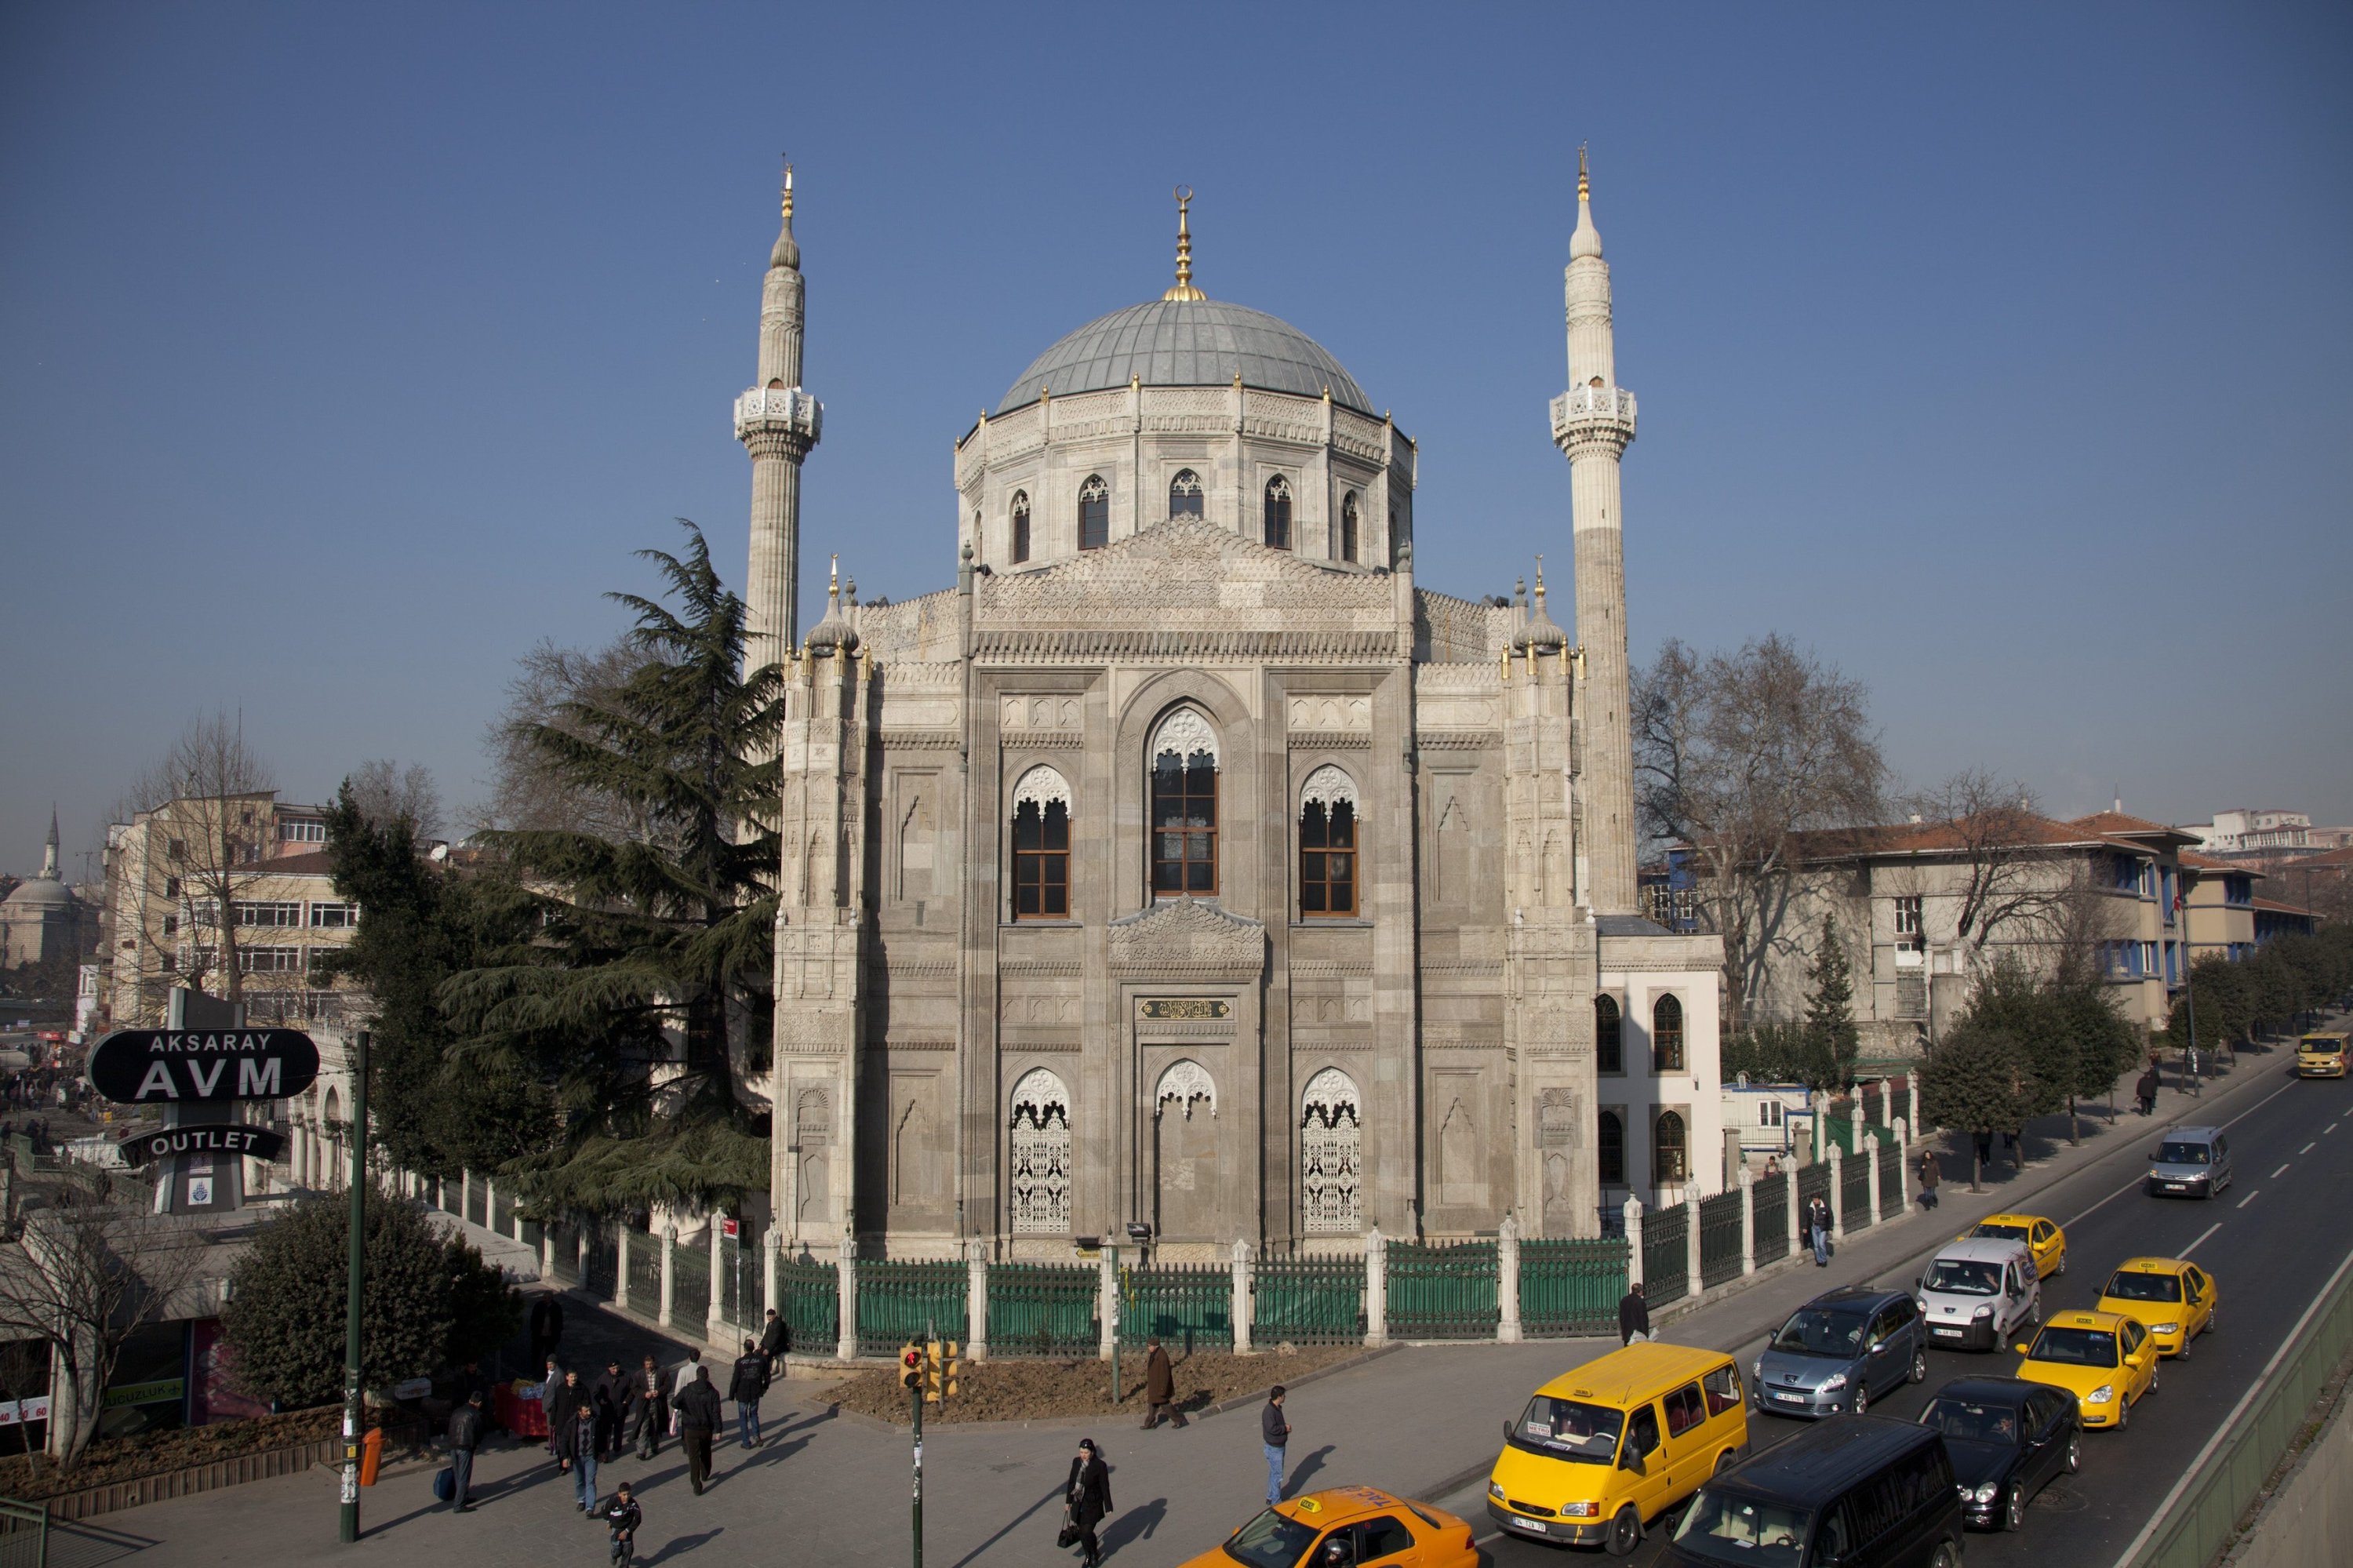 A general view of the Pertevniyal Valide Sultan Mosque, Aksaray, Istanbul, March 9, 2011. (Photo by Hasan Ay)